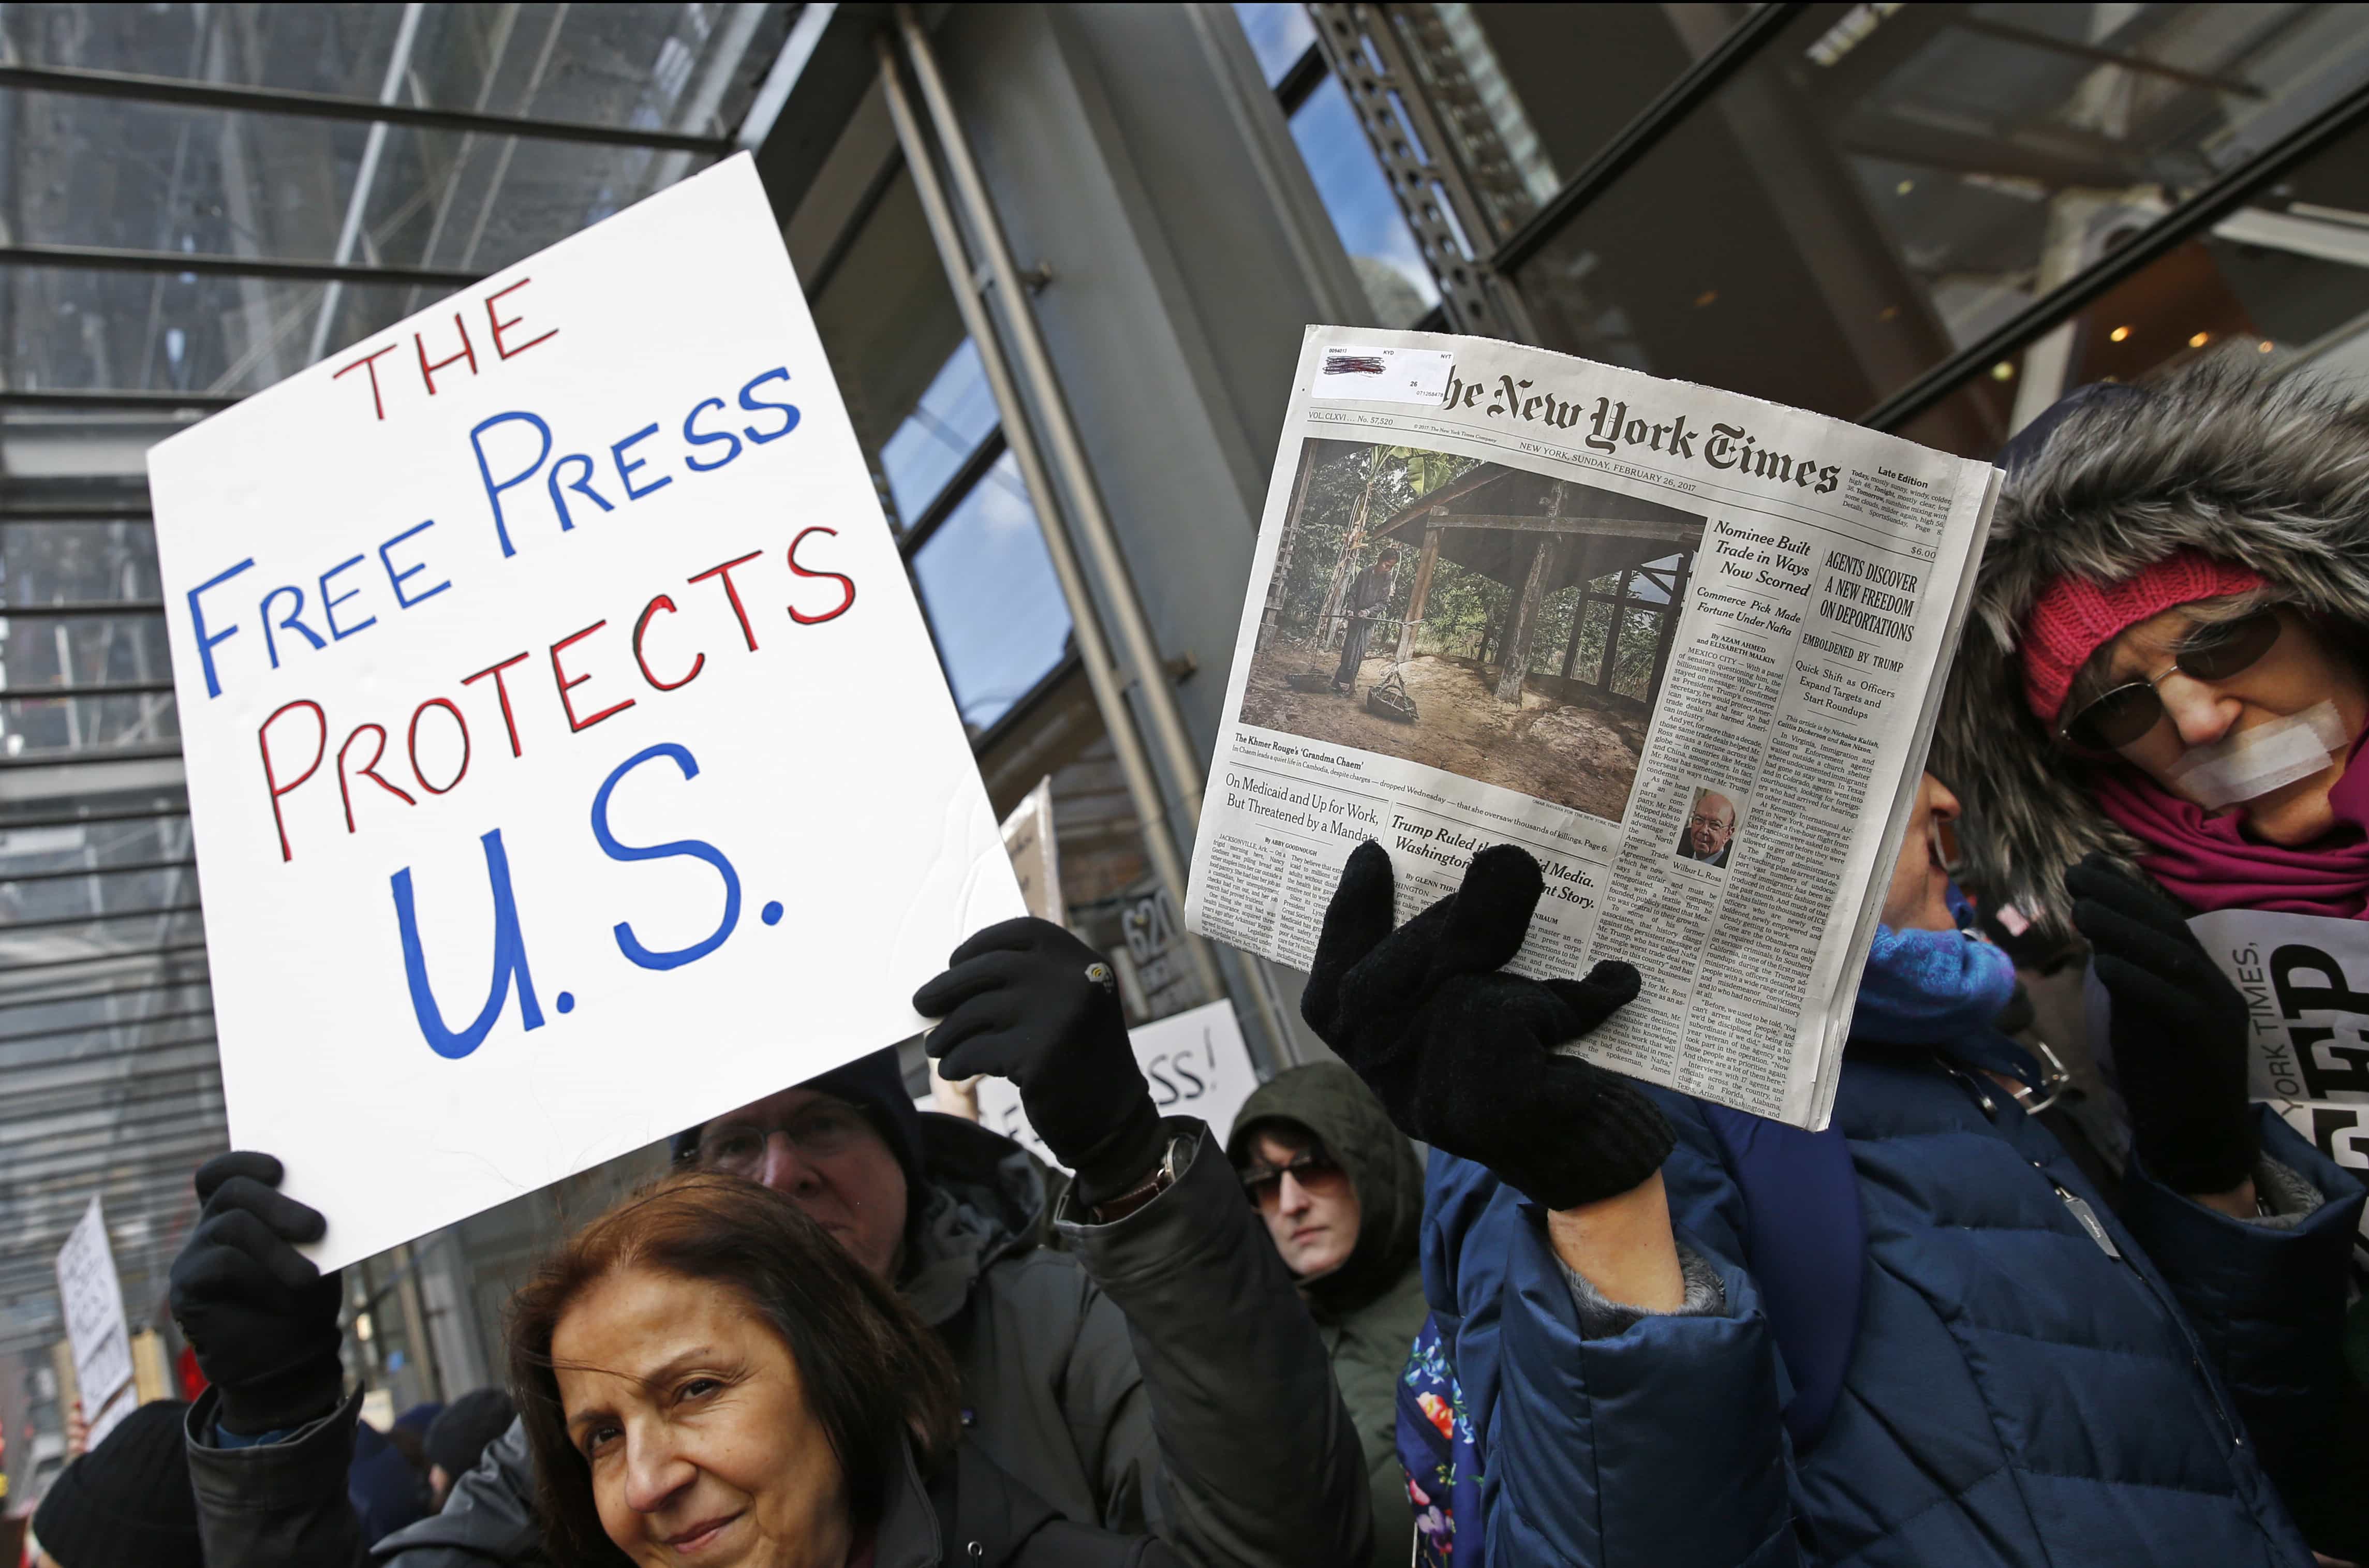 Protesters hold signs during a show of solidarity with the press in front of The New York Times building, 26 February 2017, in New York, AP Photo/Kathy Willens